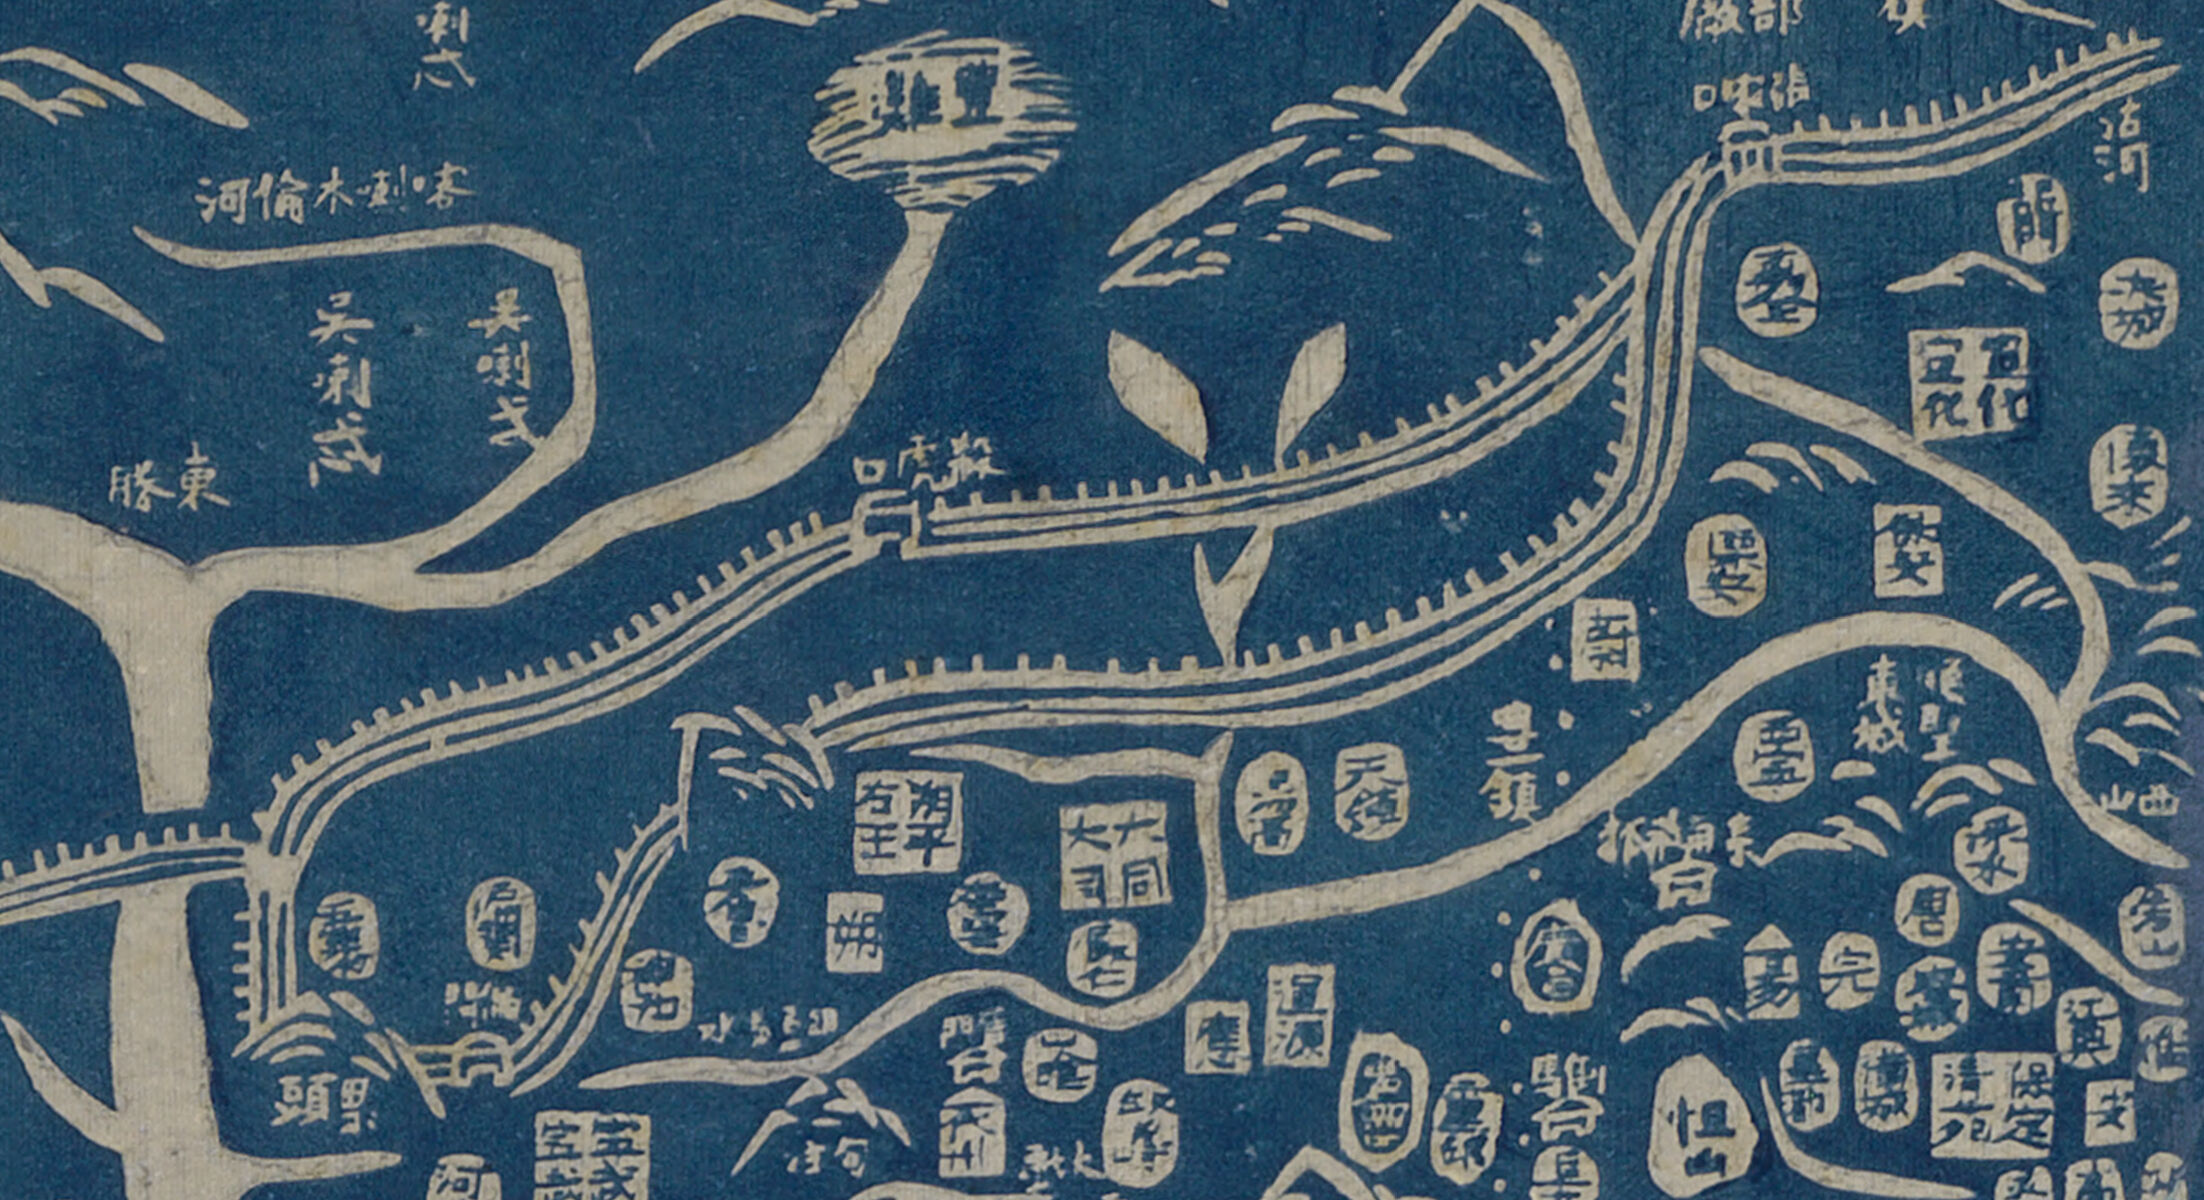 An excerpt of the terrestrial map showing the Great Wall alongside administrative names symbolized using different shapes